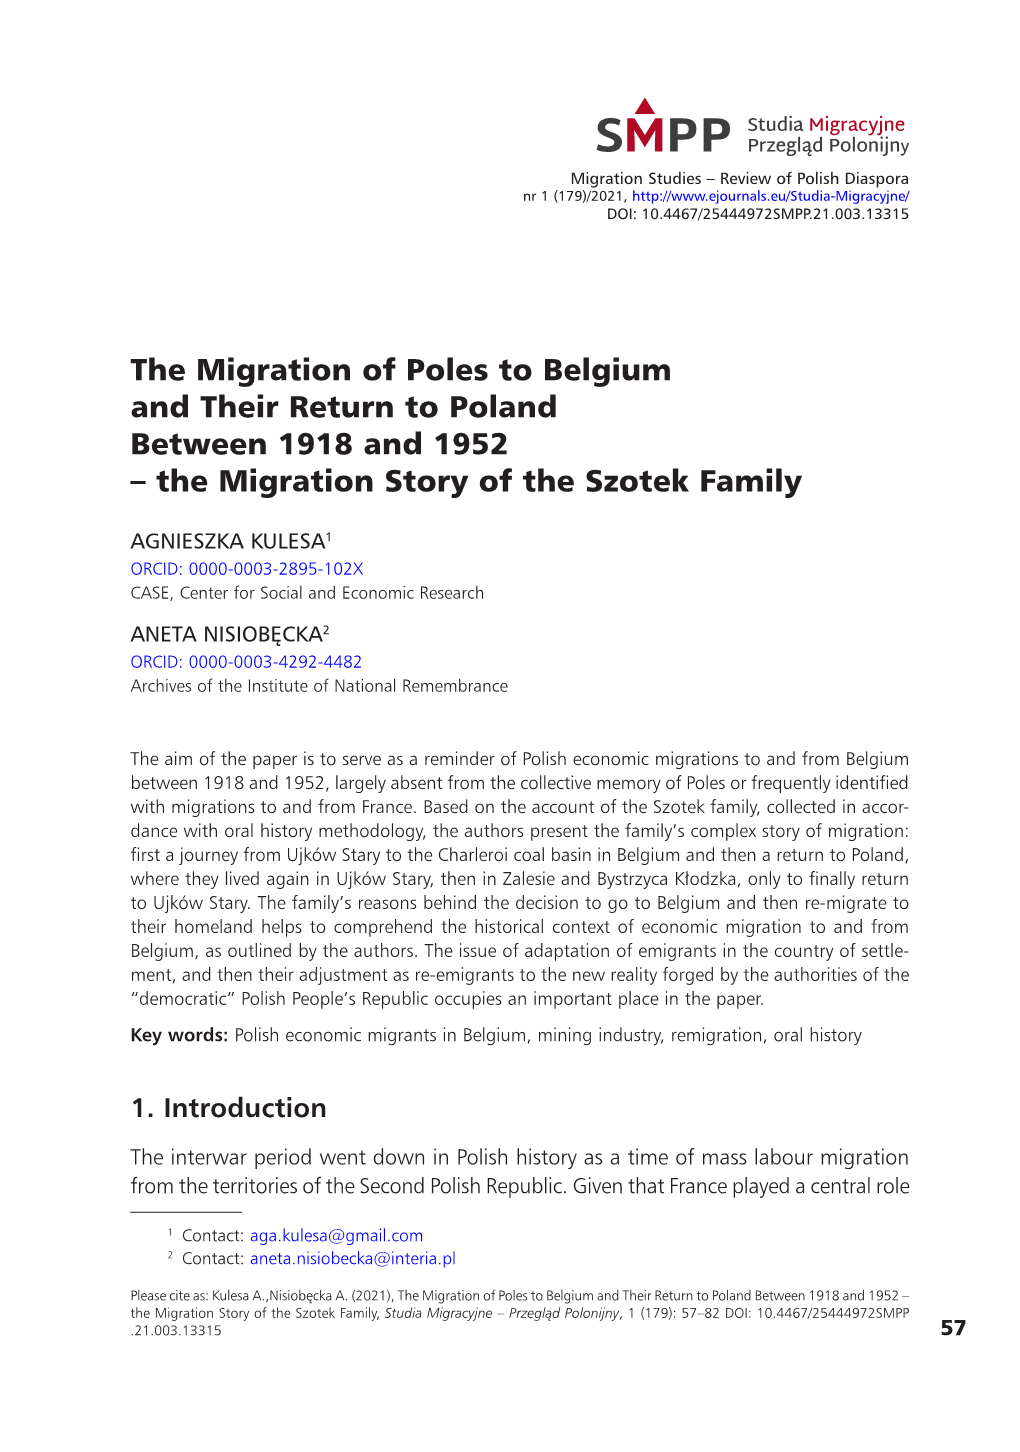 The Migration of Poles to Belgium and Their Return to Poland Between 1918 and 1952 – the Migration Story of the Szotek Family